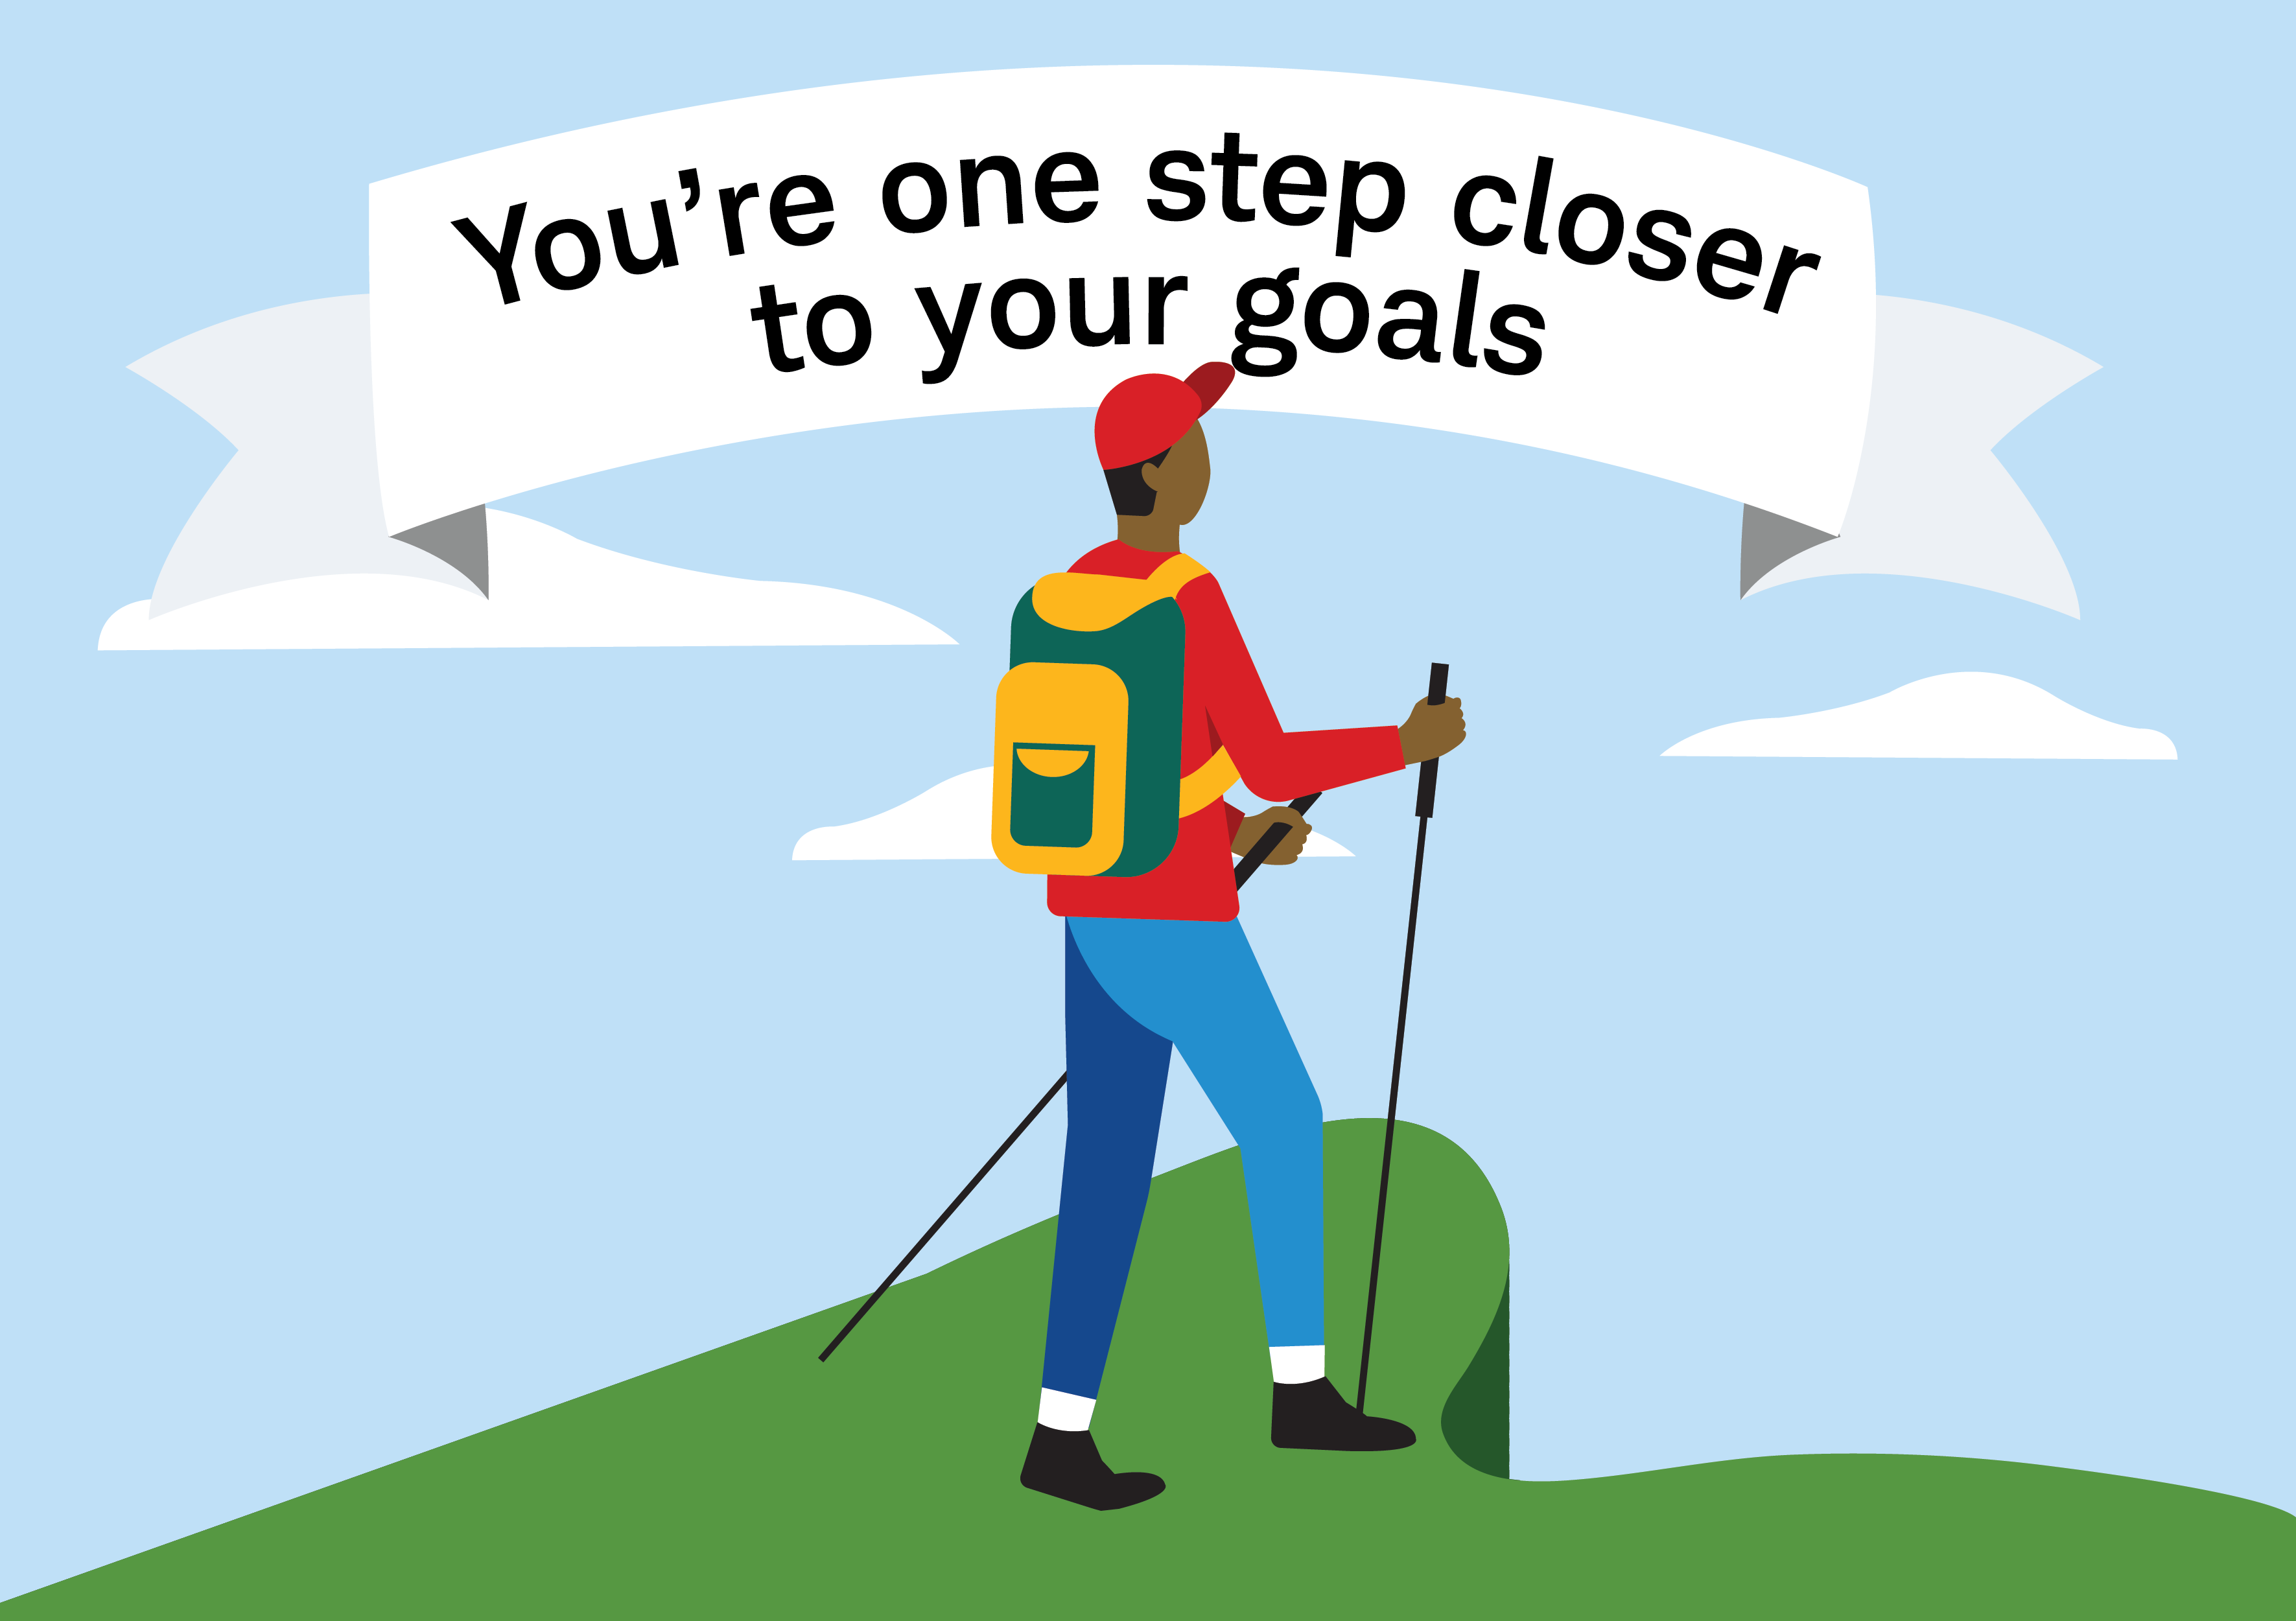 You're one step closer to your goals